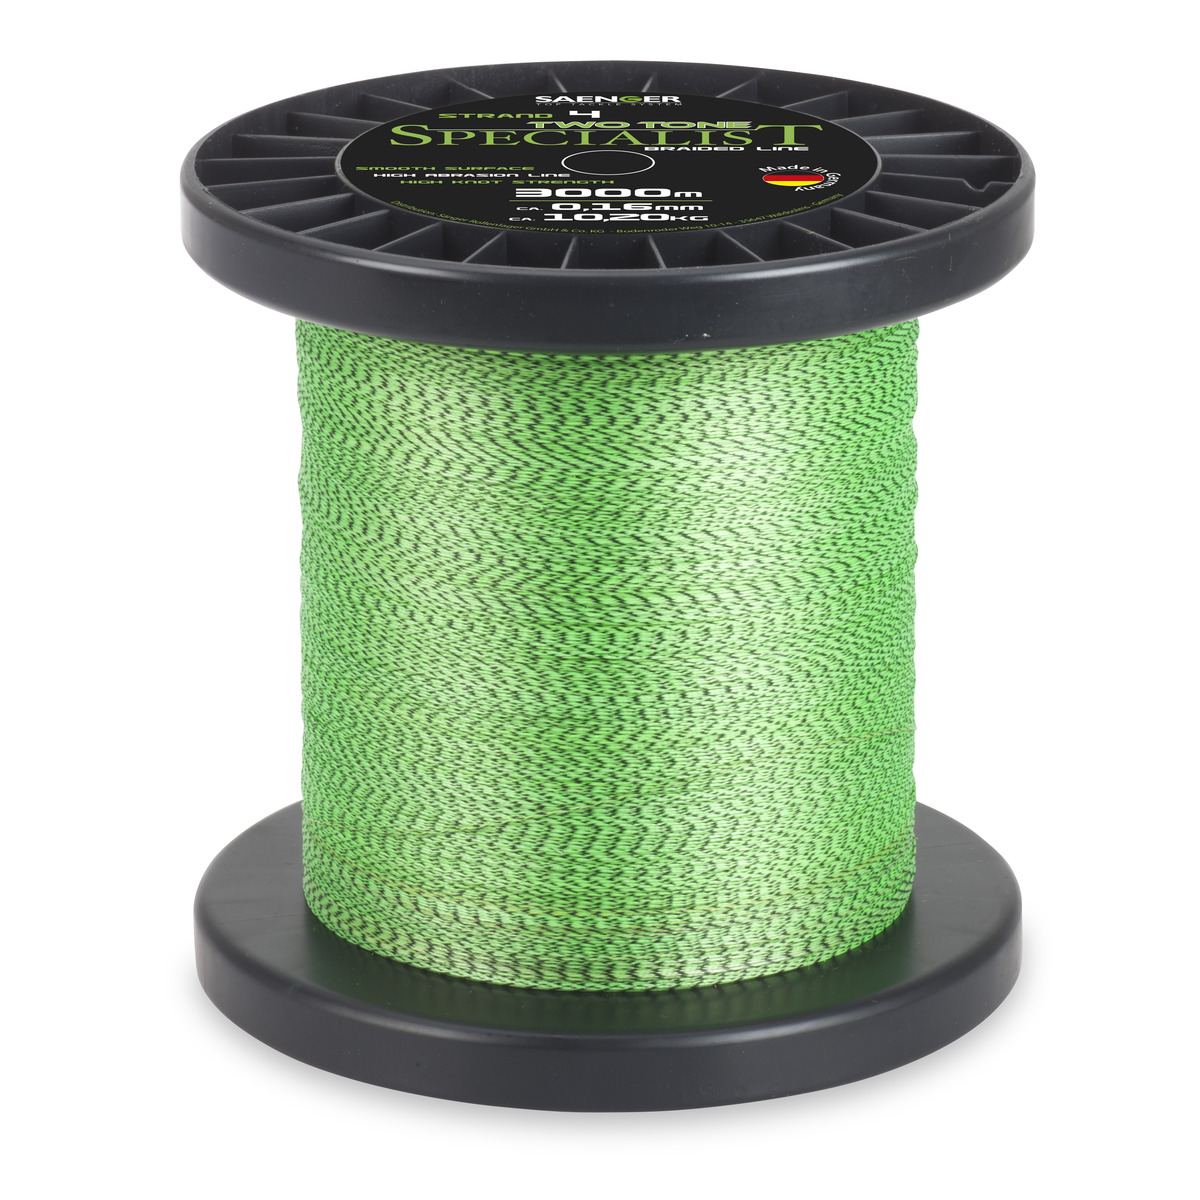 Saenger Specialist Two Tone Fluo Braid - 0,16 mm - 10,2 kg 3000 m